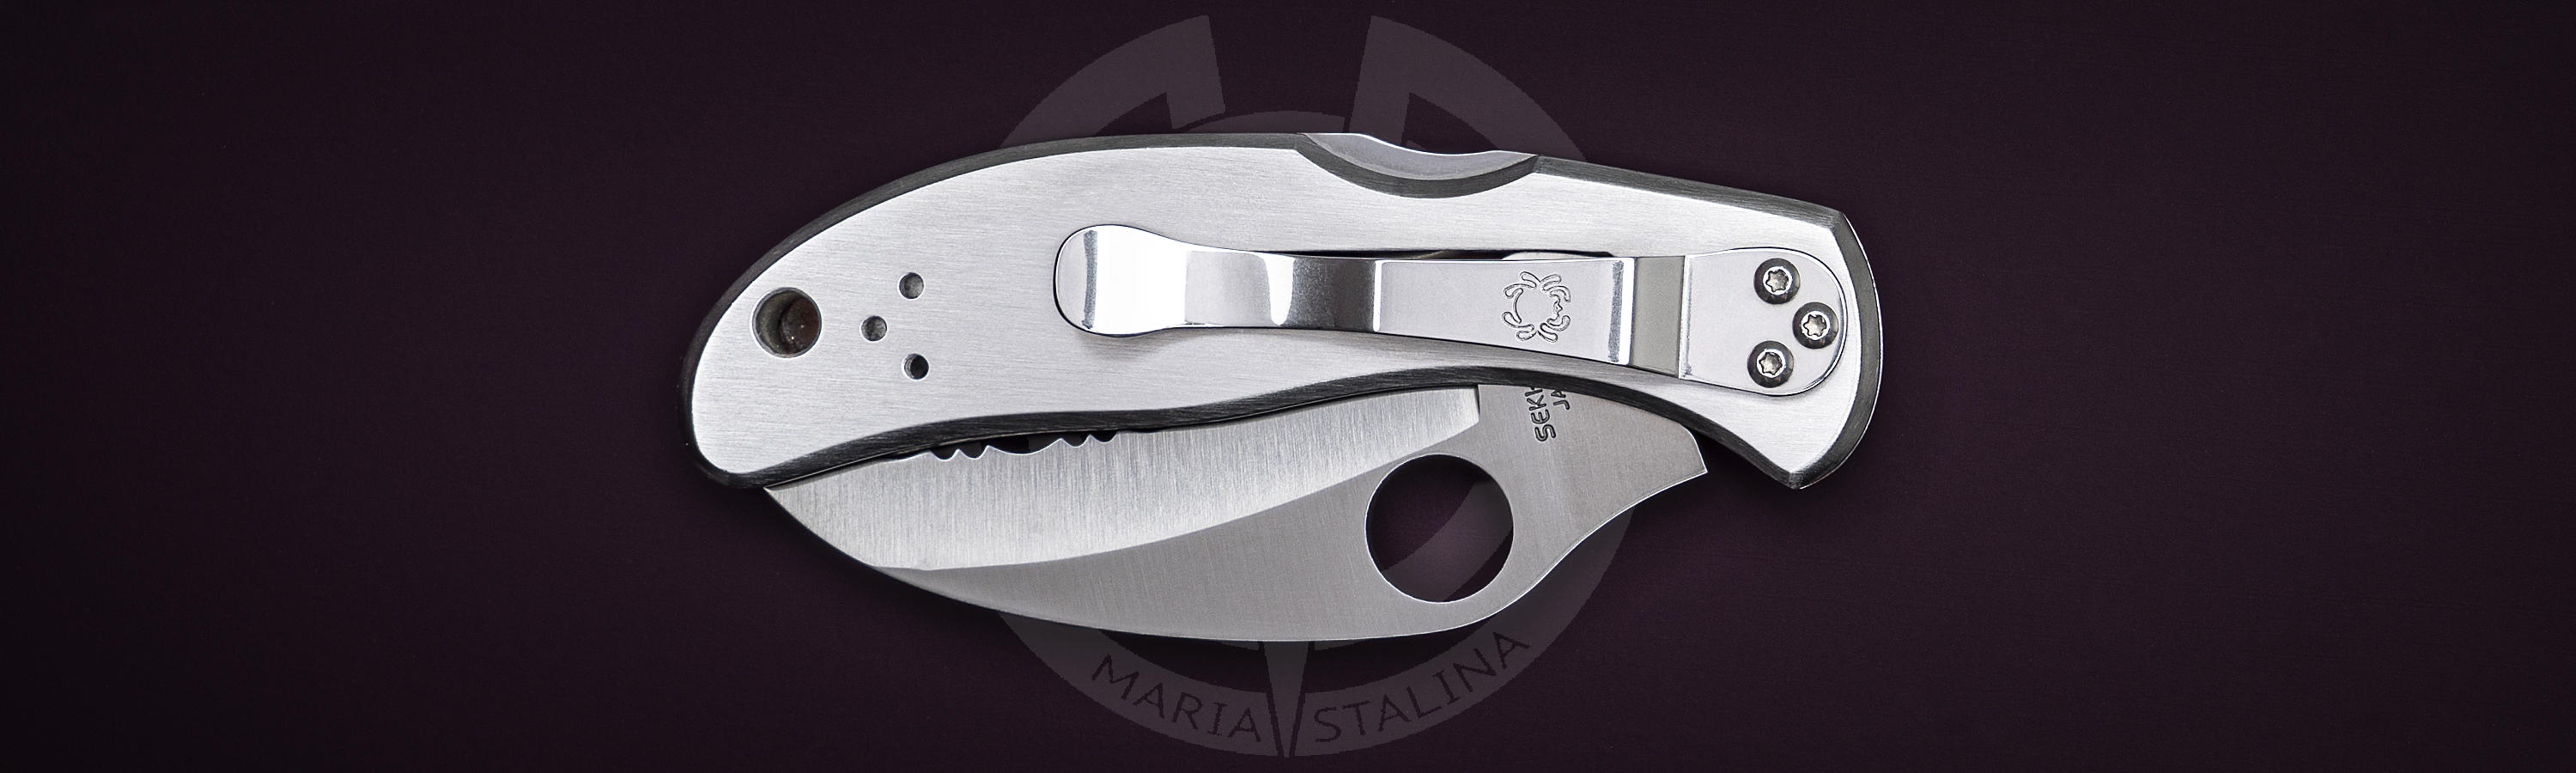 Stainless steel pocket clip of the Harpy